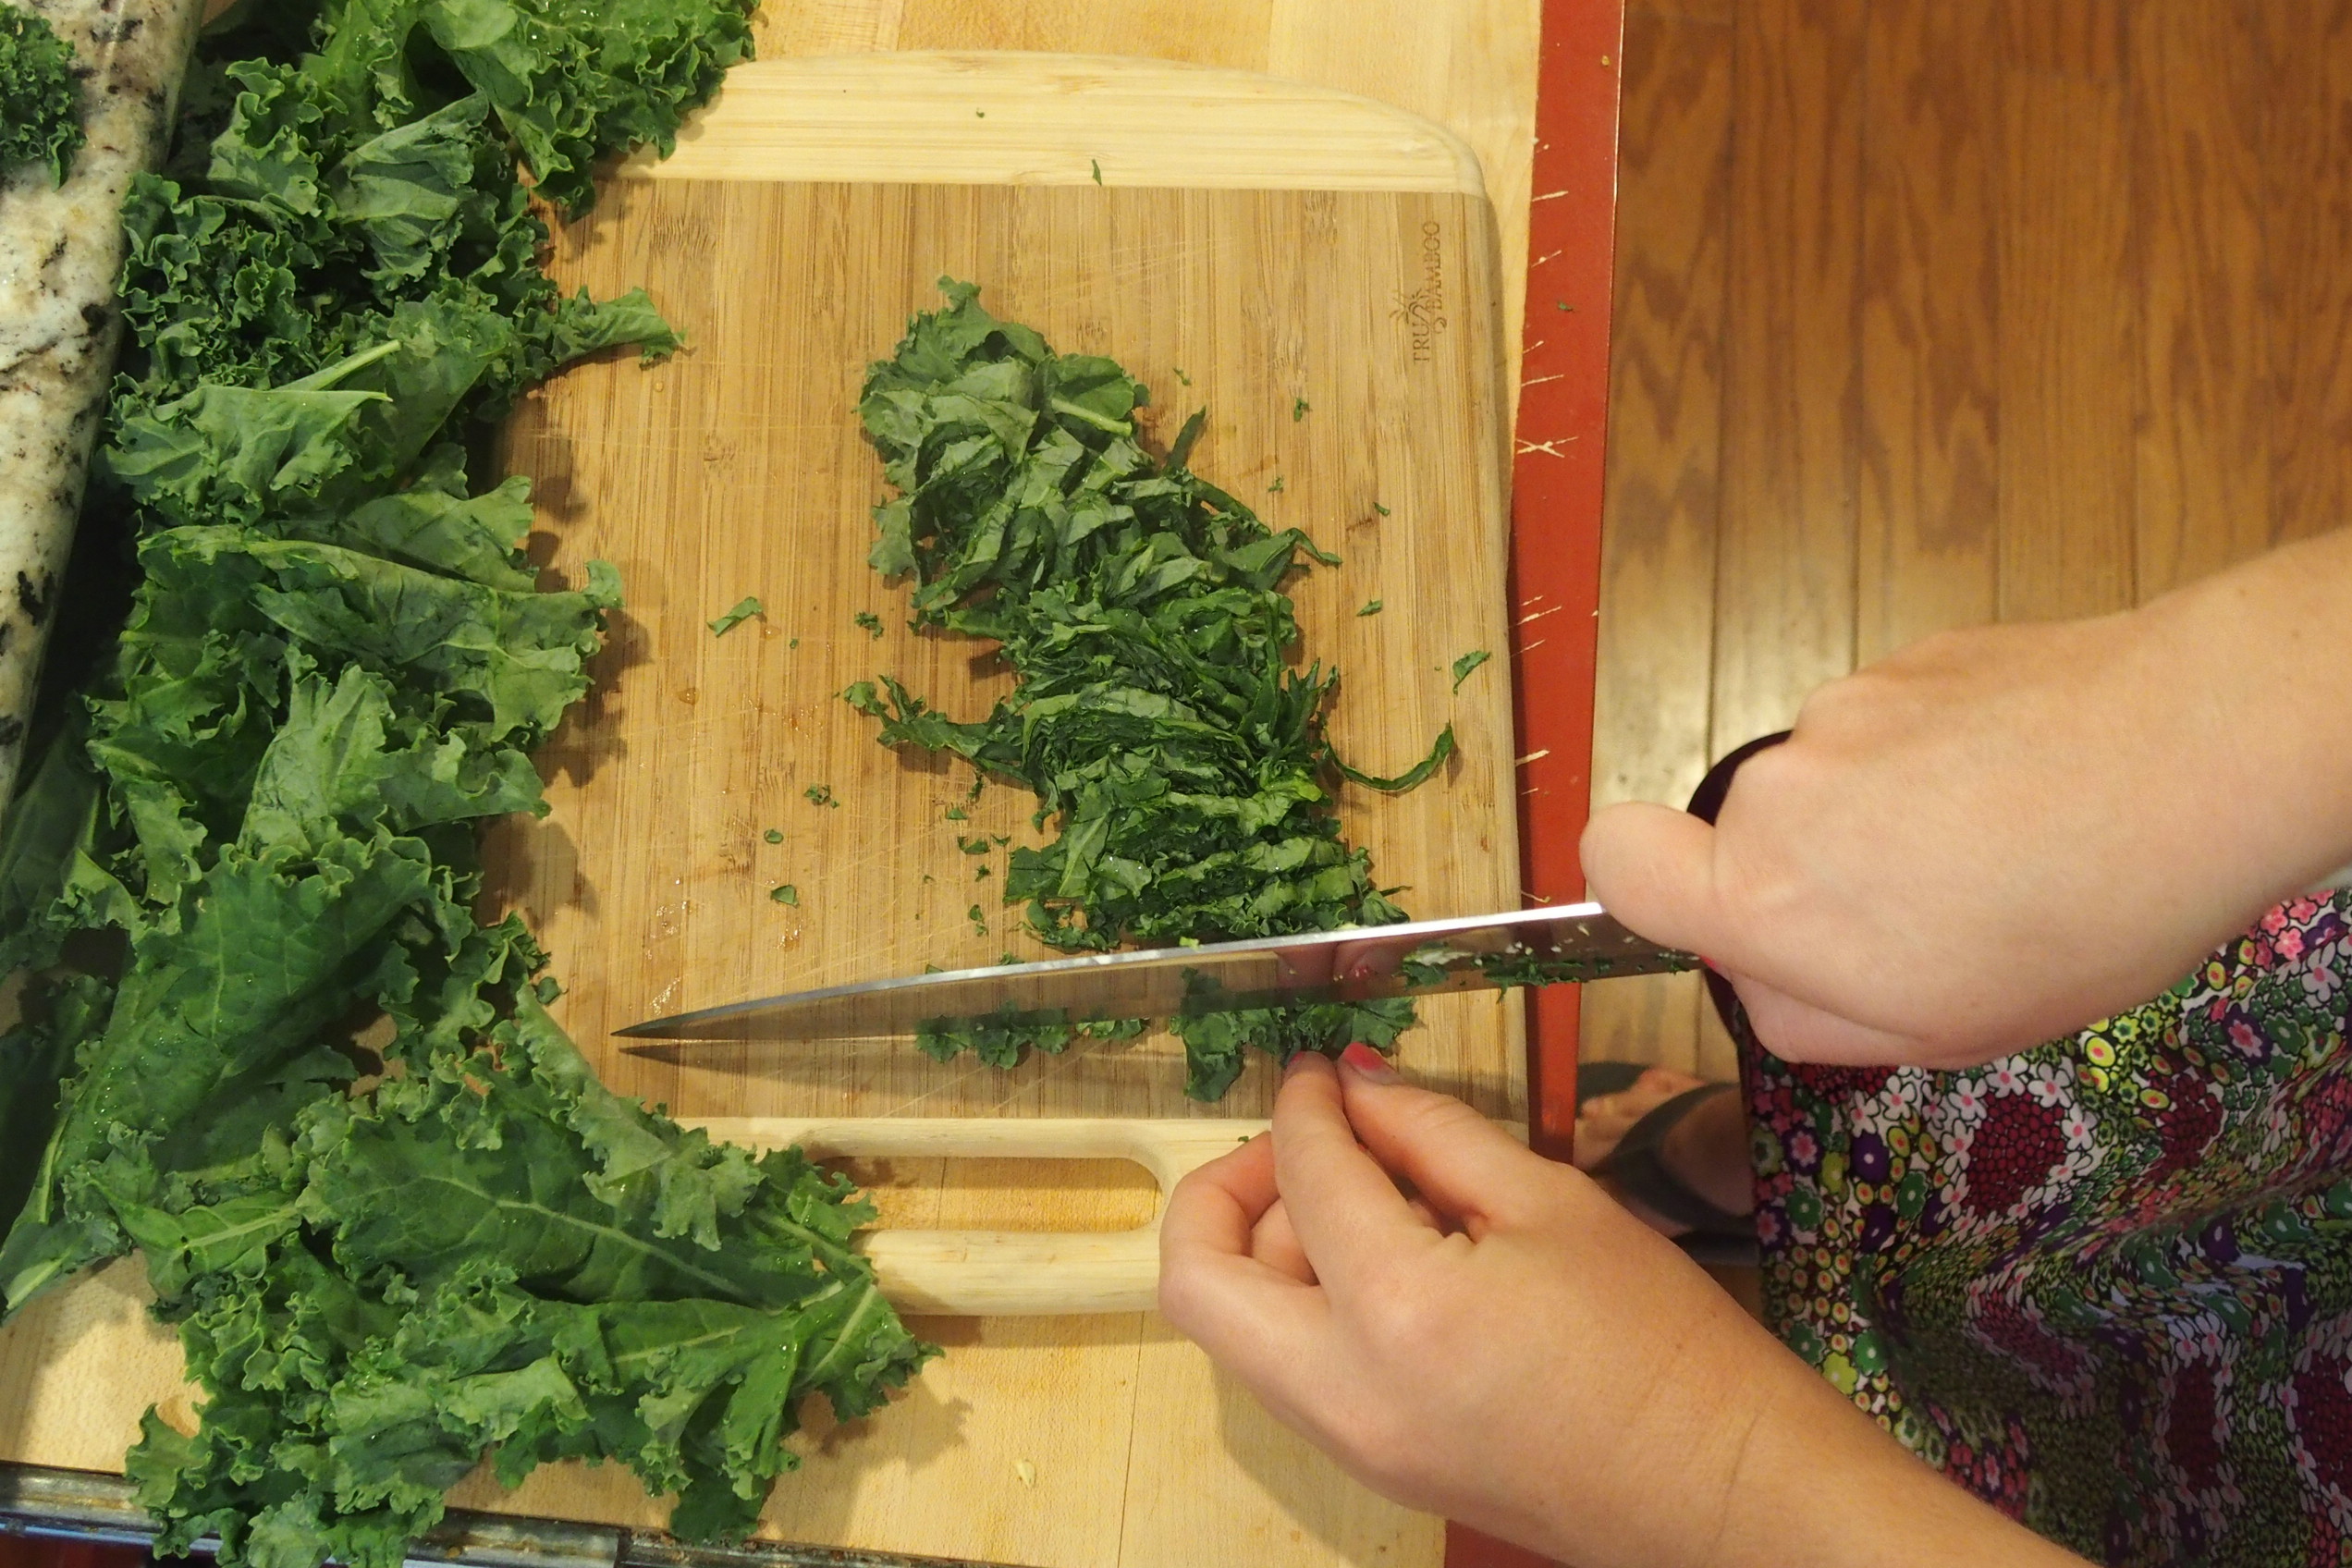 kale | The Nutty Nutritionist